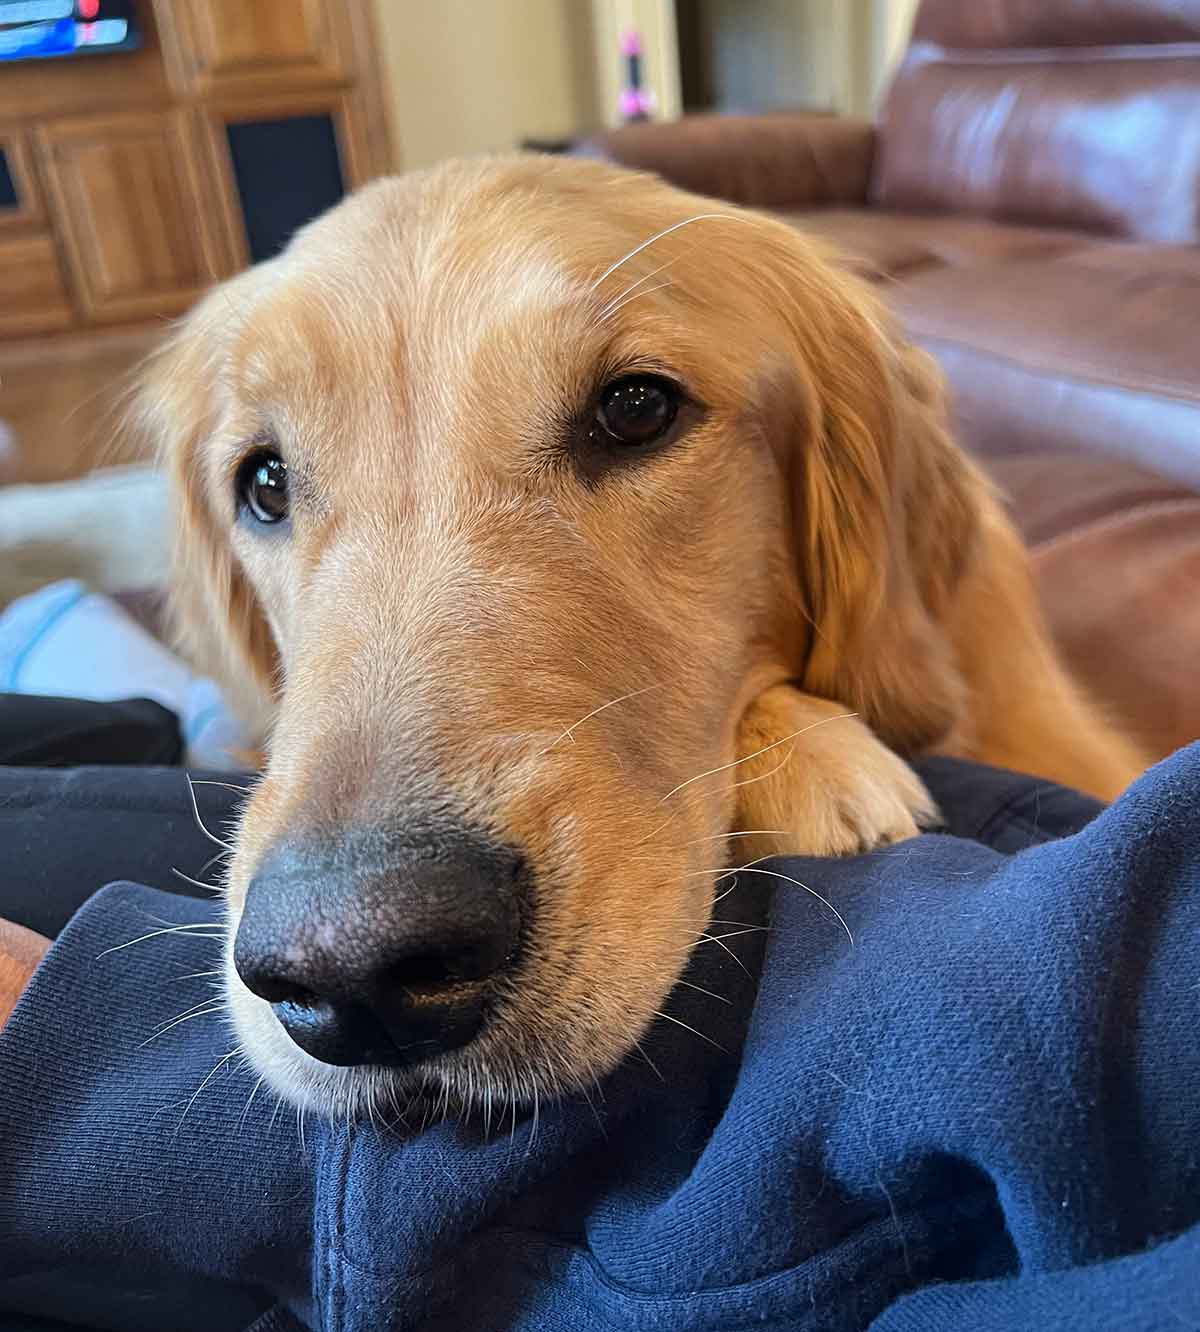 Golden Retriever dog with head resting on a person's arm.